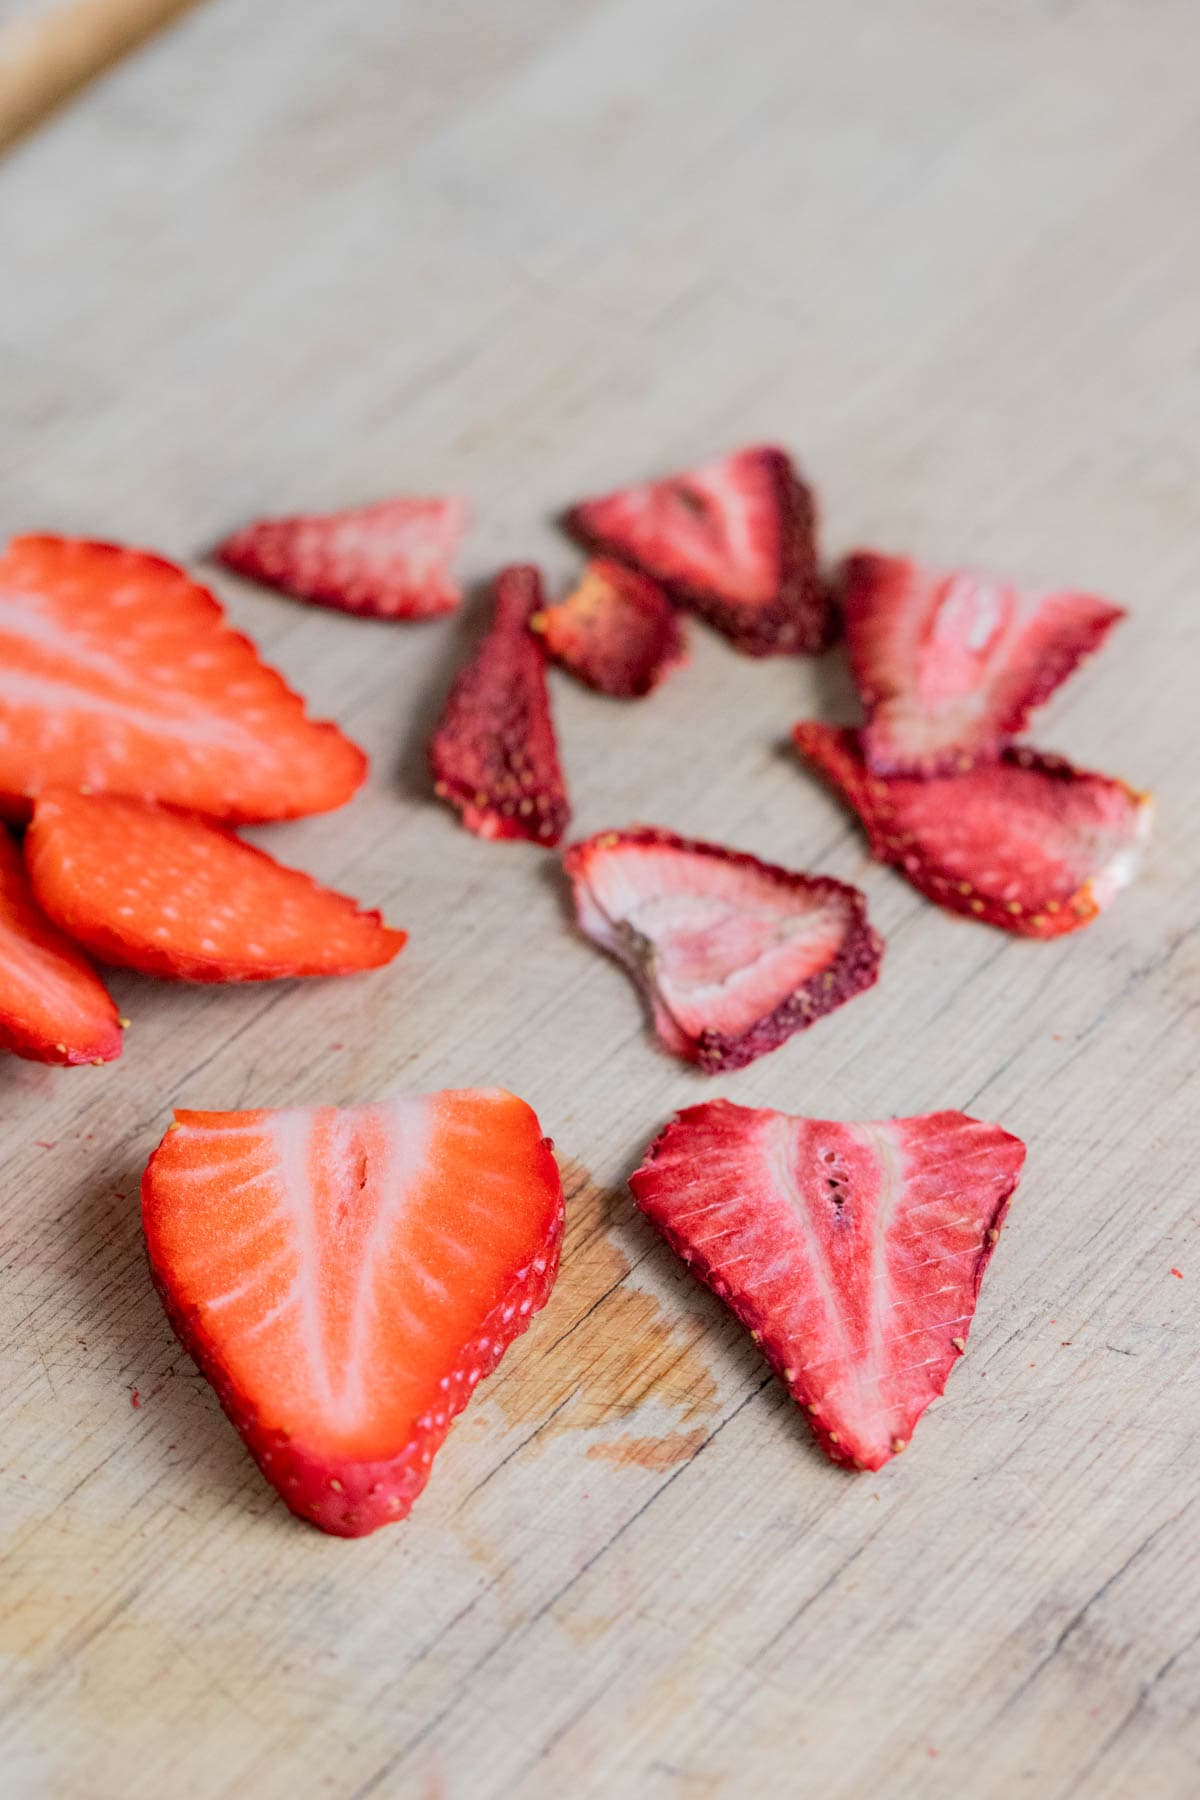 a comparison between fresh and dry strawberries